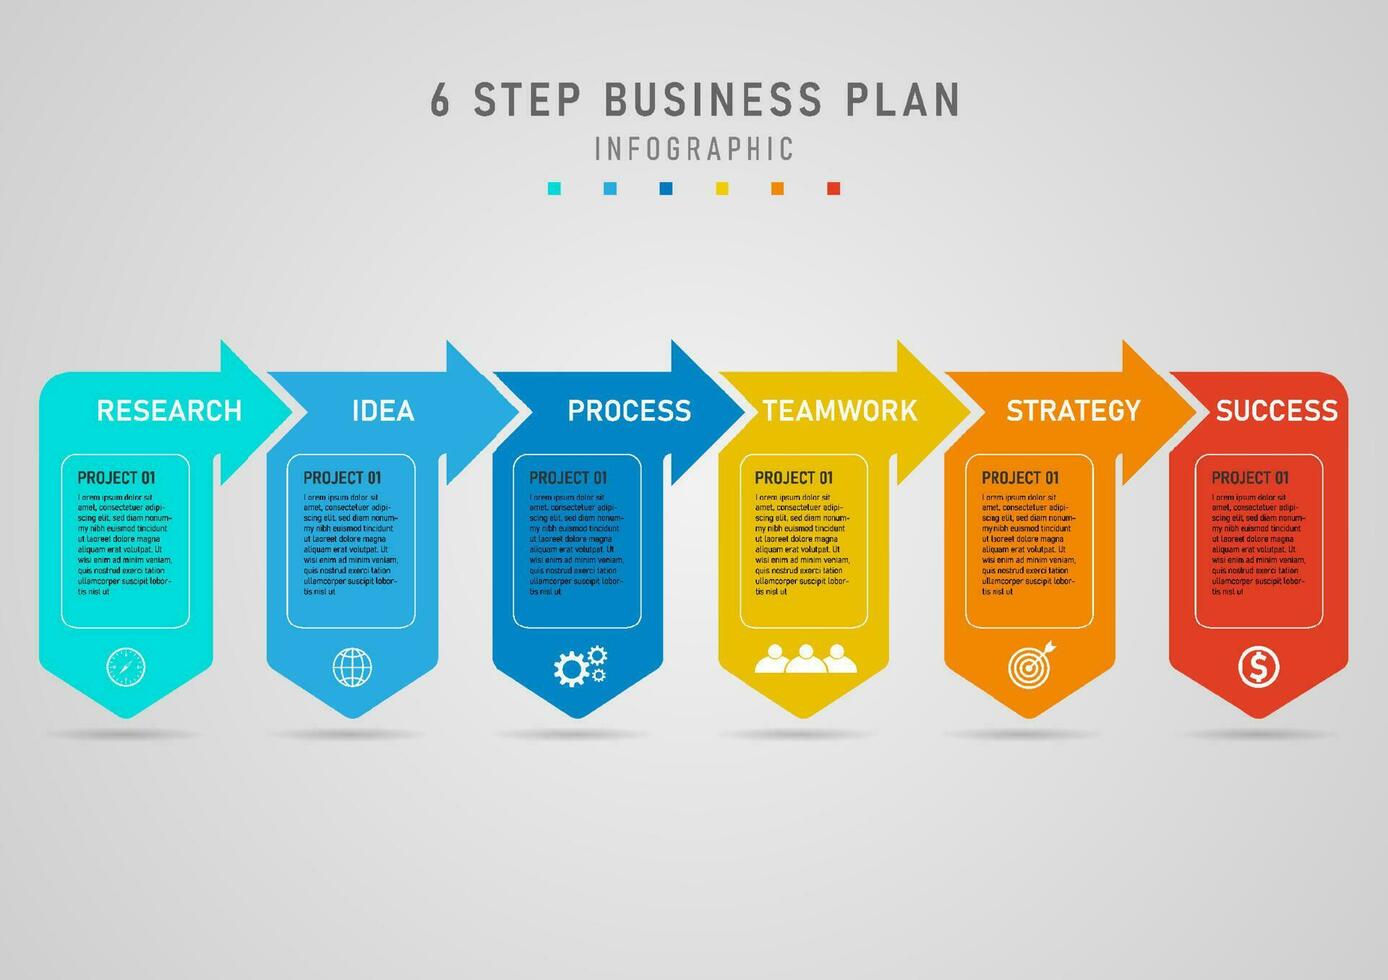 Business plan simple 6 step infographic template to success multicolored squares with arrows white icon below gray gradient background design for marketing, finance, product, project, investment vector